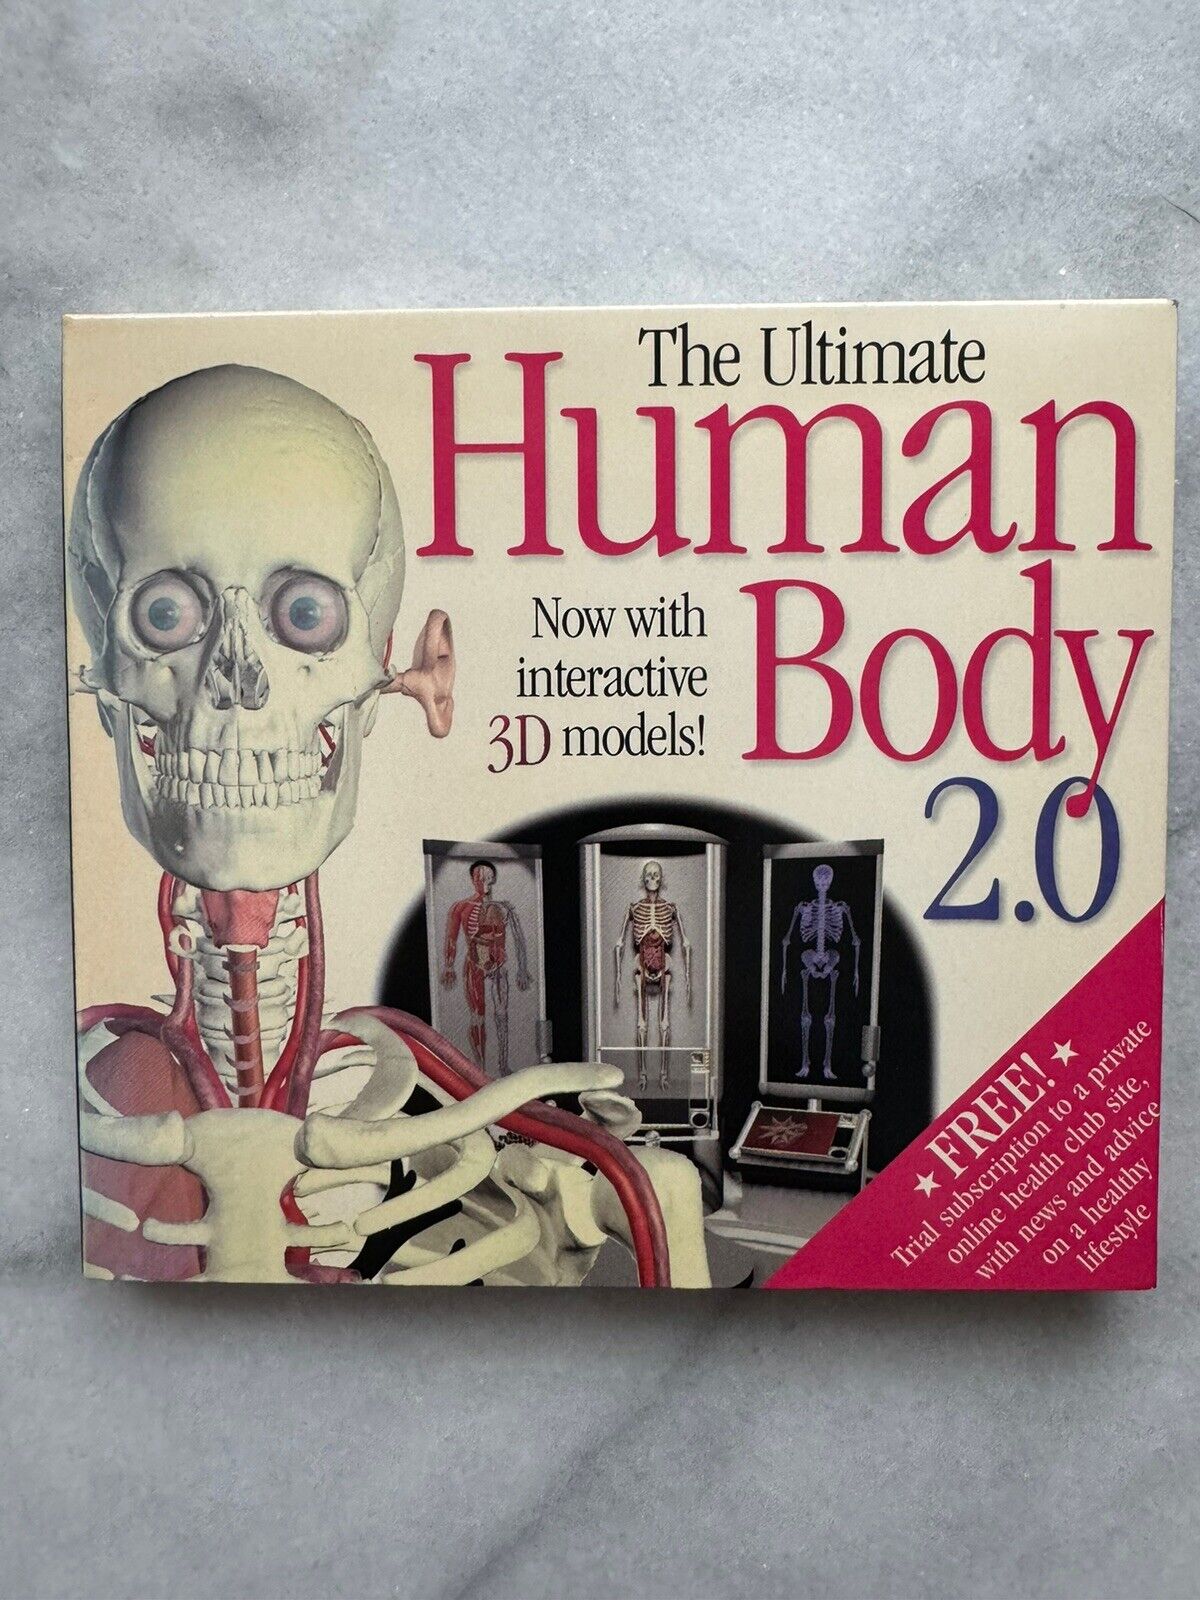 The Ultimate Human Body 2.0 by DK Multimedia for Mac CD-ROM